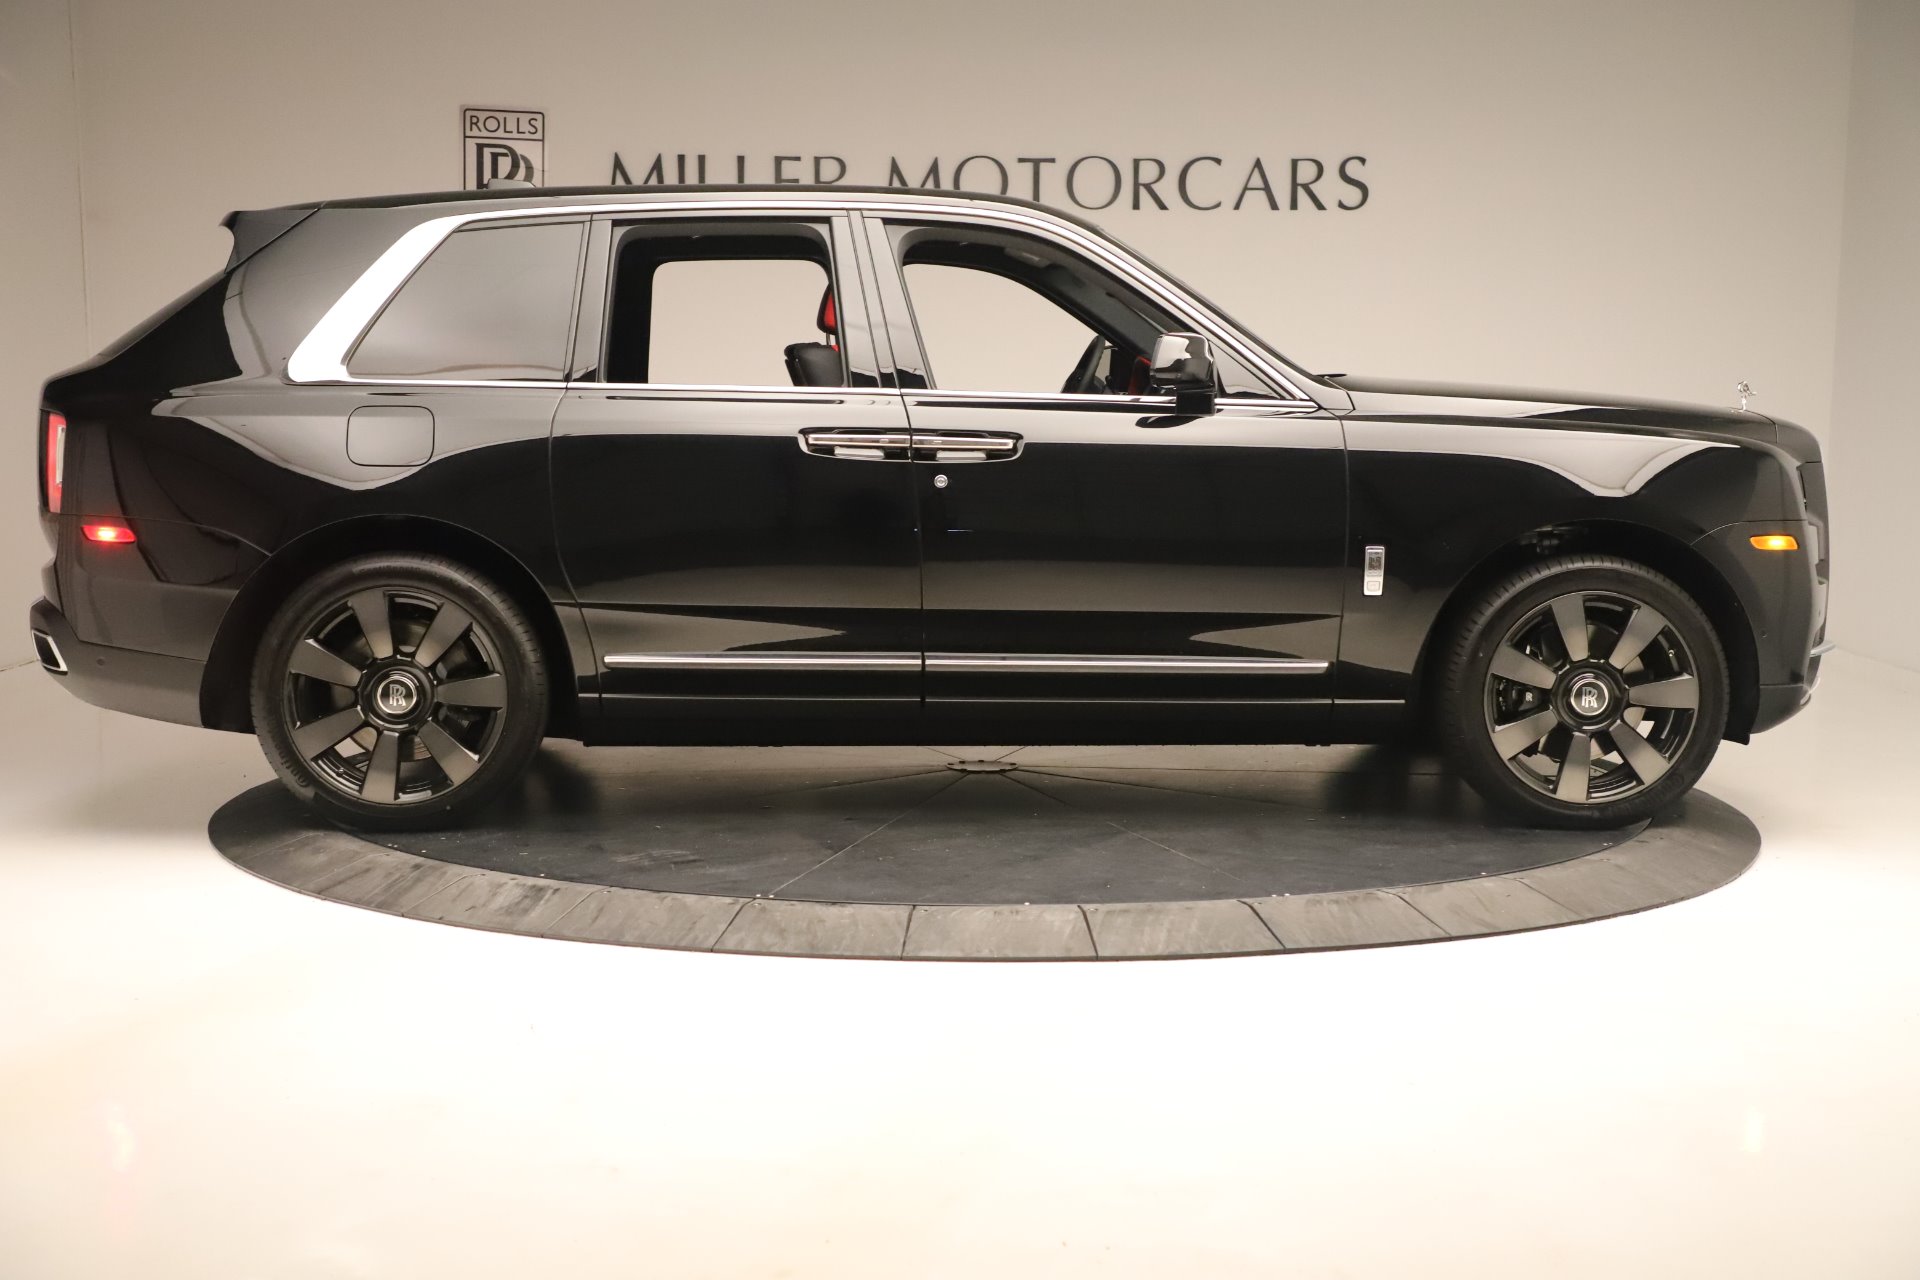 New 2020 Rolls Royce Cullinan For Sale Special Pricing Rolls